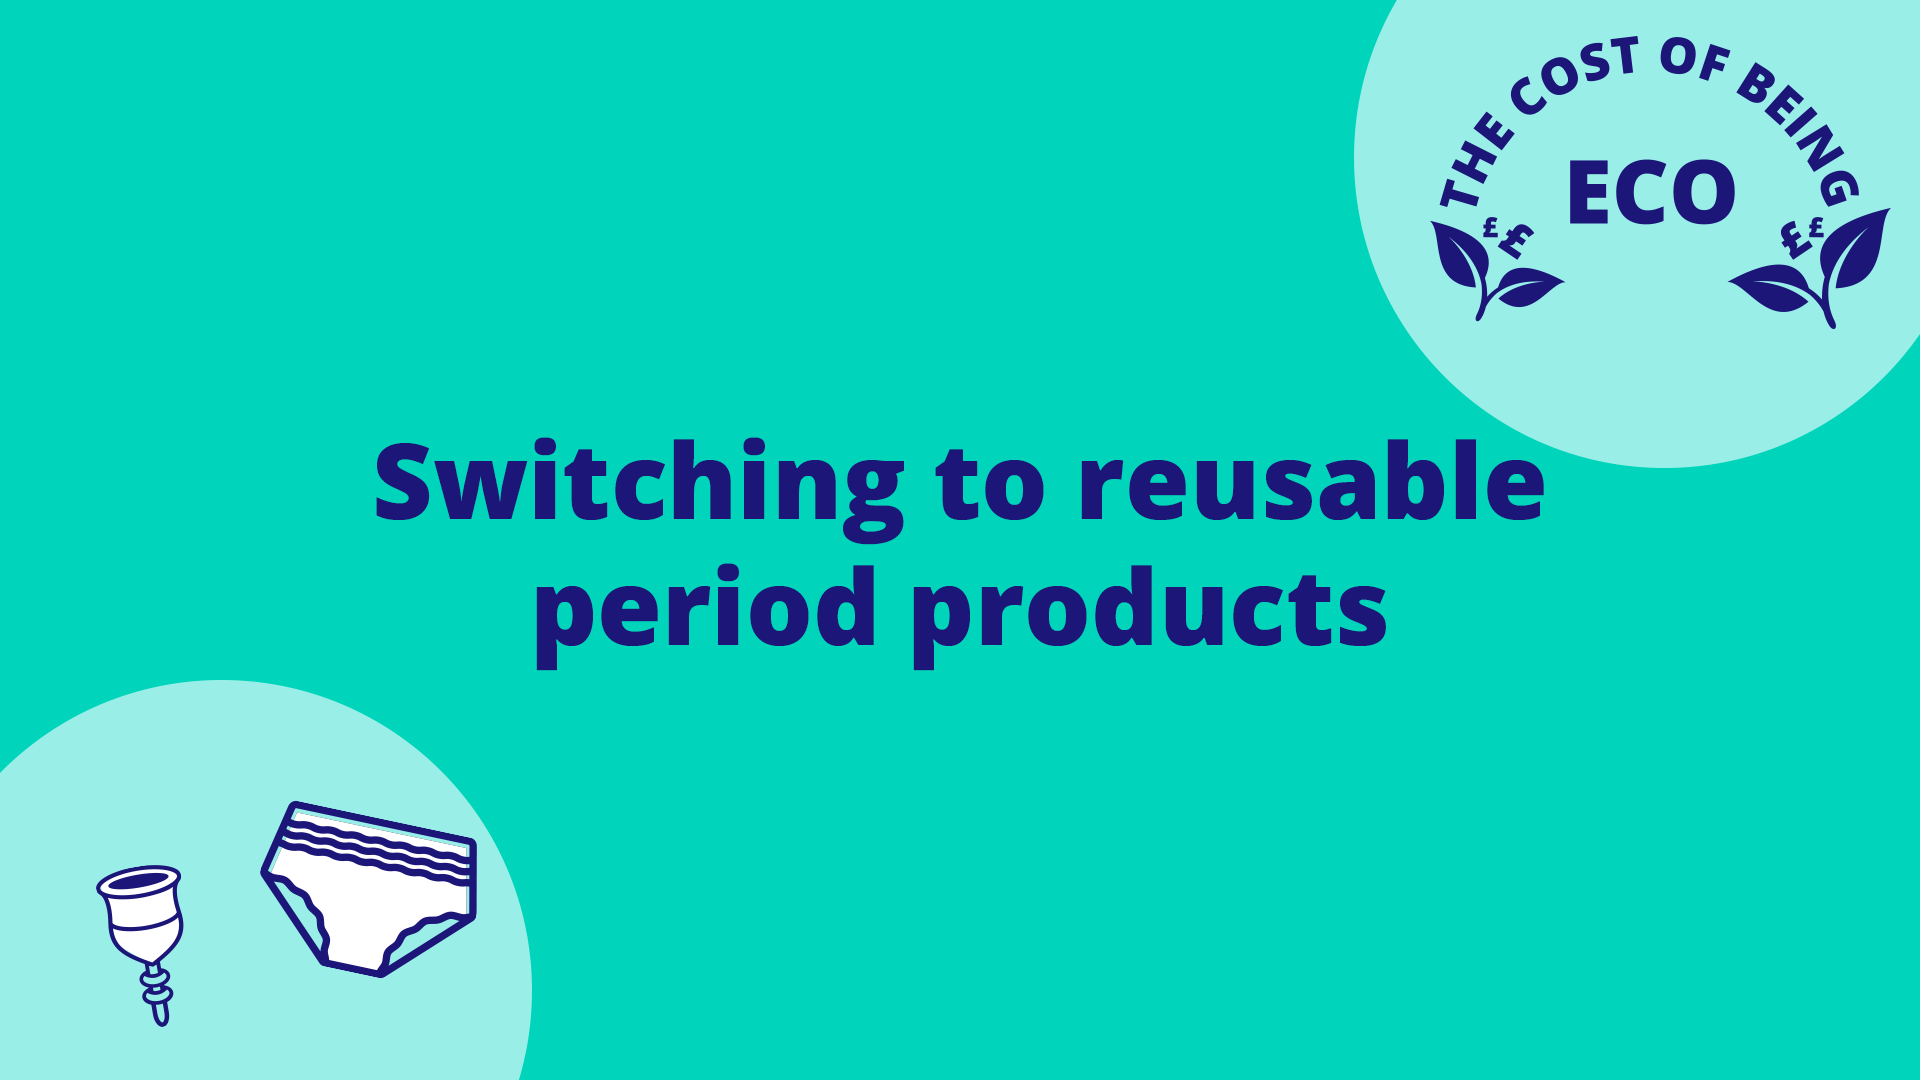 Featured image for The Cost of Being Eco: switching to reusable period products